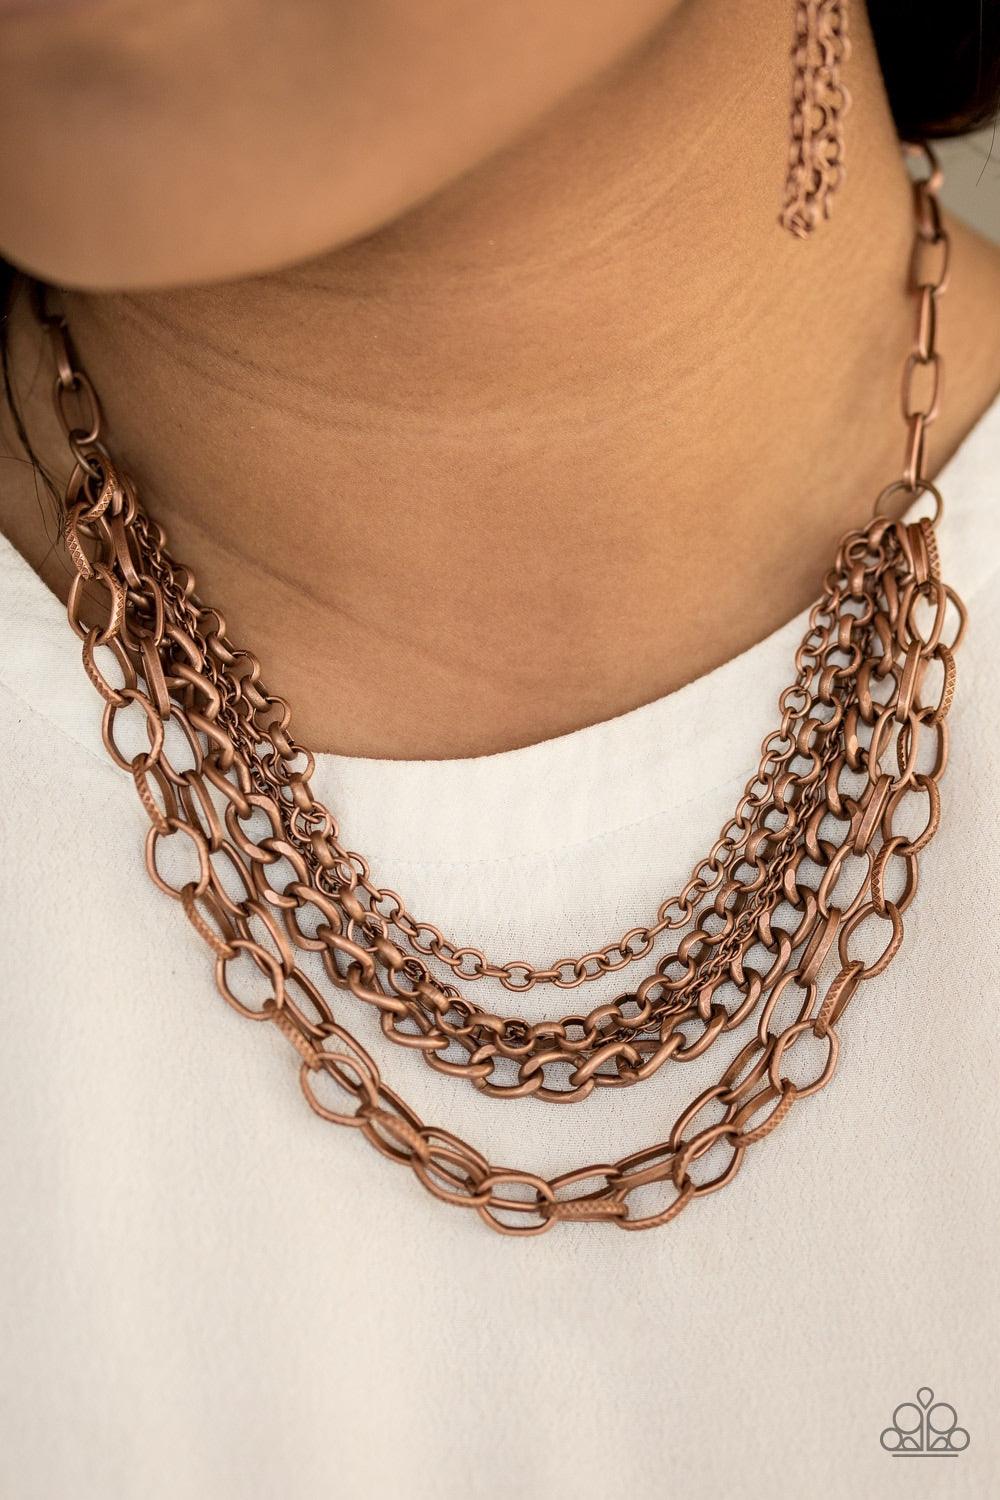 Paparazzi Accessories Word on the Street - Copper Varying in size and shape, glistening copper chains layer below the collar. Featuring smooth and textured links, the mixed metallic palette stacks into a collision of industrial shimmer for an edgy look. F